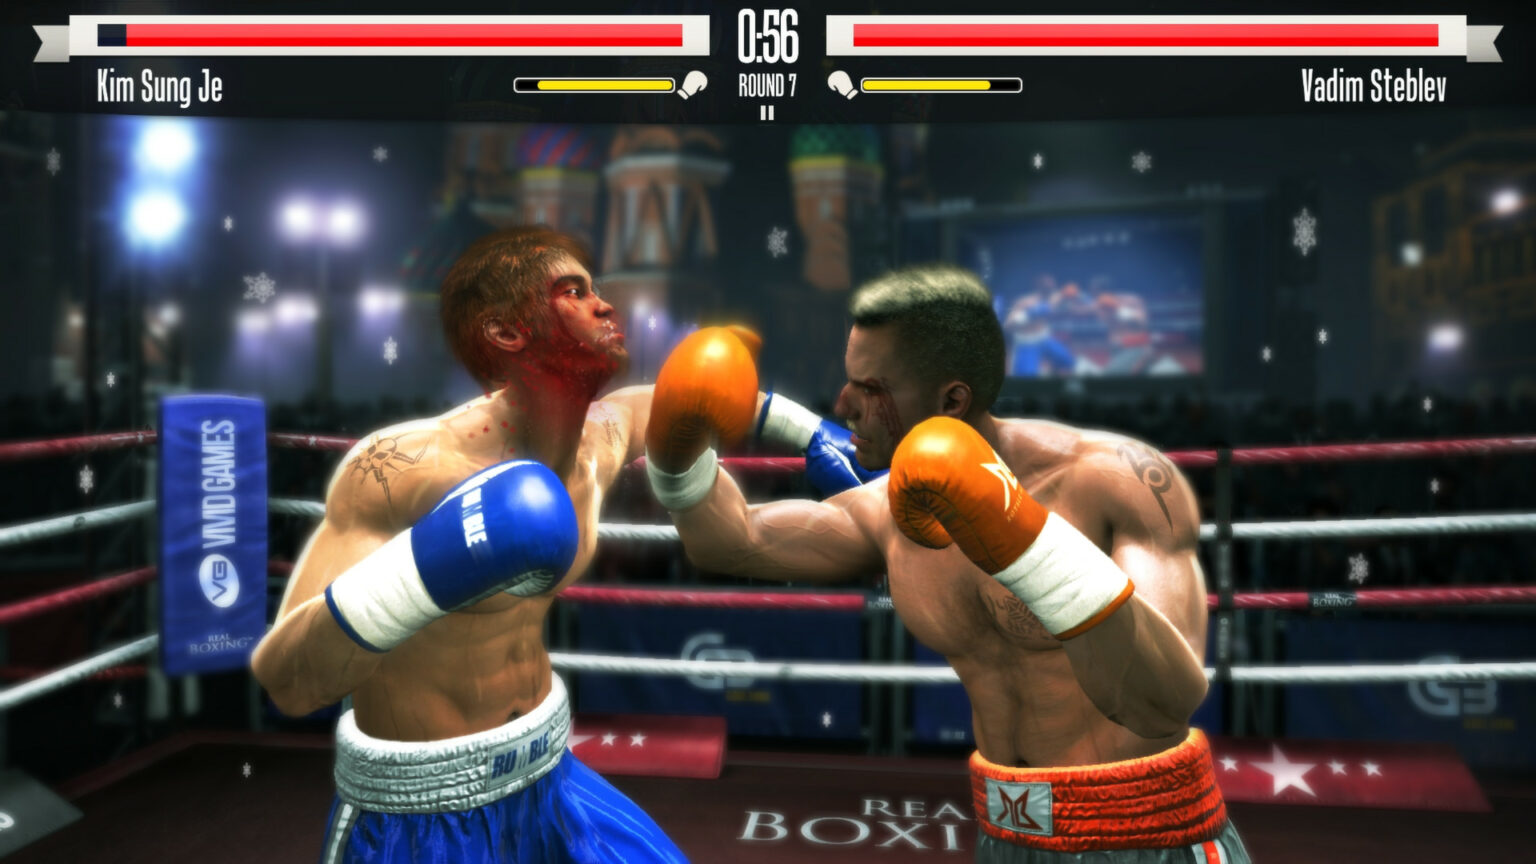 Real Boxing 1536x864 